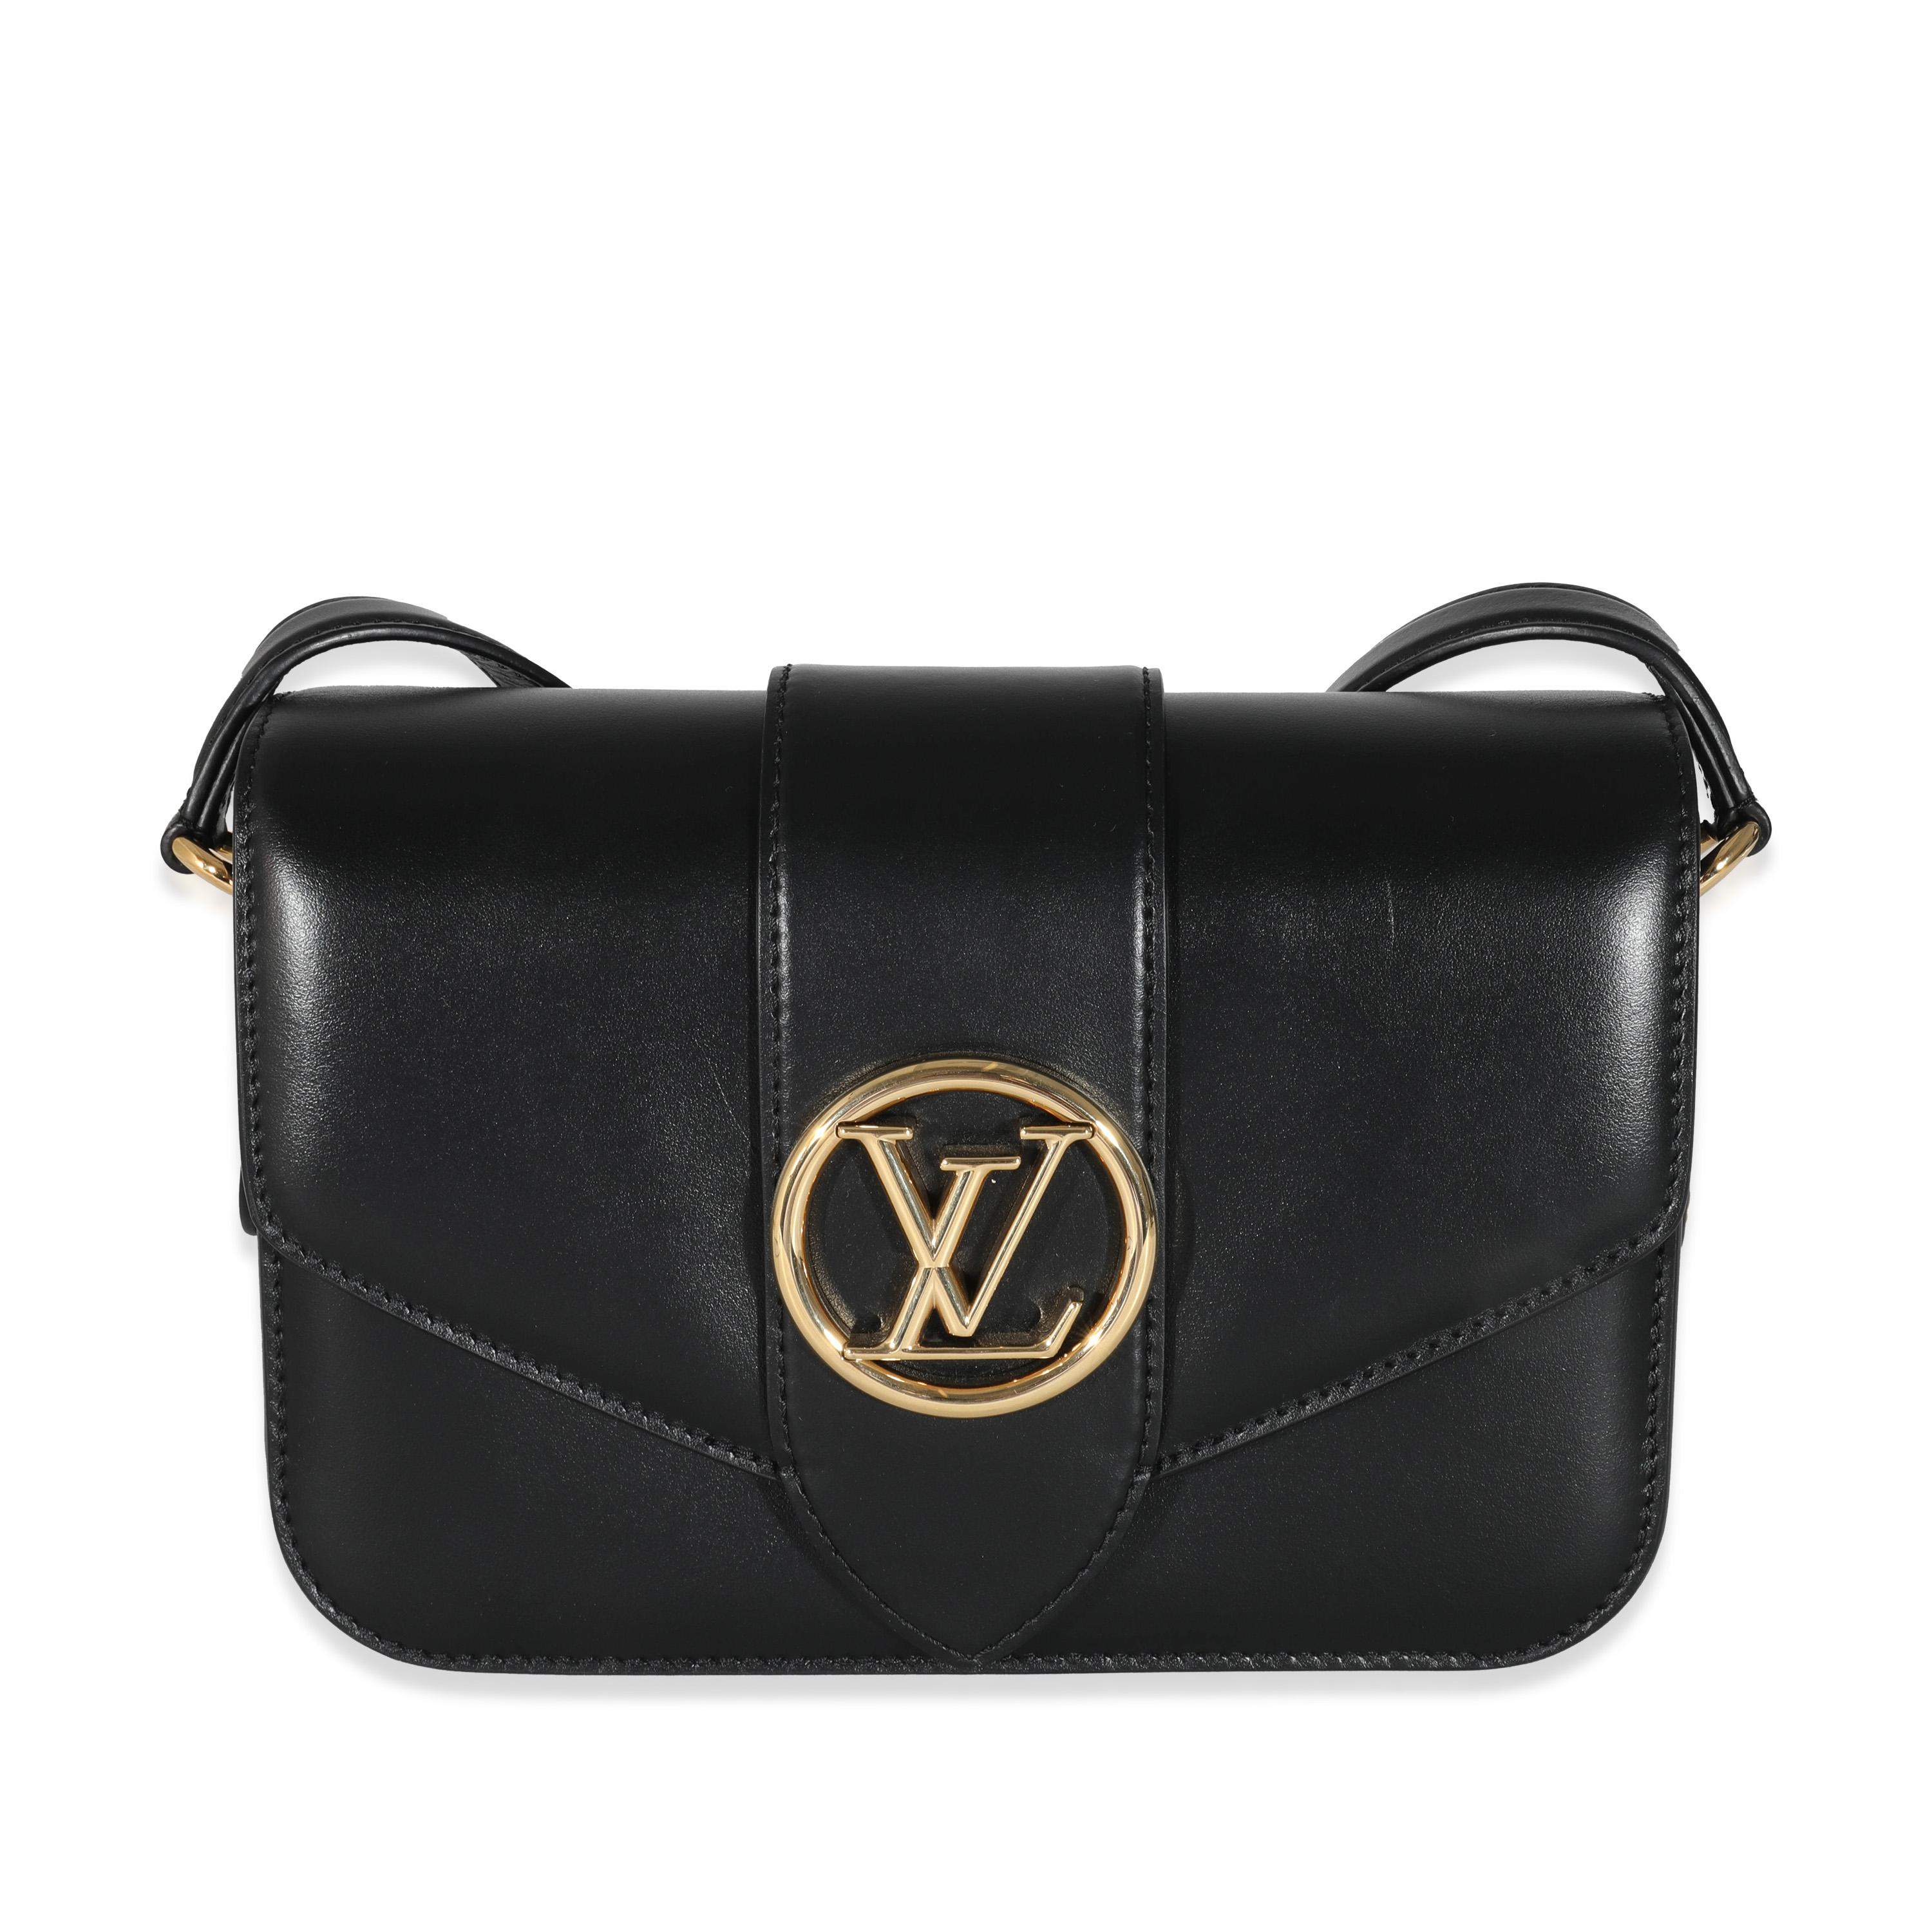 Listing Title: Louis Vuitton Black Smooth Calfskin LV Pont 9 MM
SKU: 131725
MSRP: 4200.00
Condition: Pre-owned 
Handbag Condition: Excellent
Condition Comments: Item is in excellent condition and displays light signs of wear. Minor scuffing along